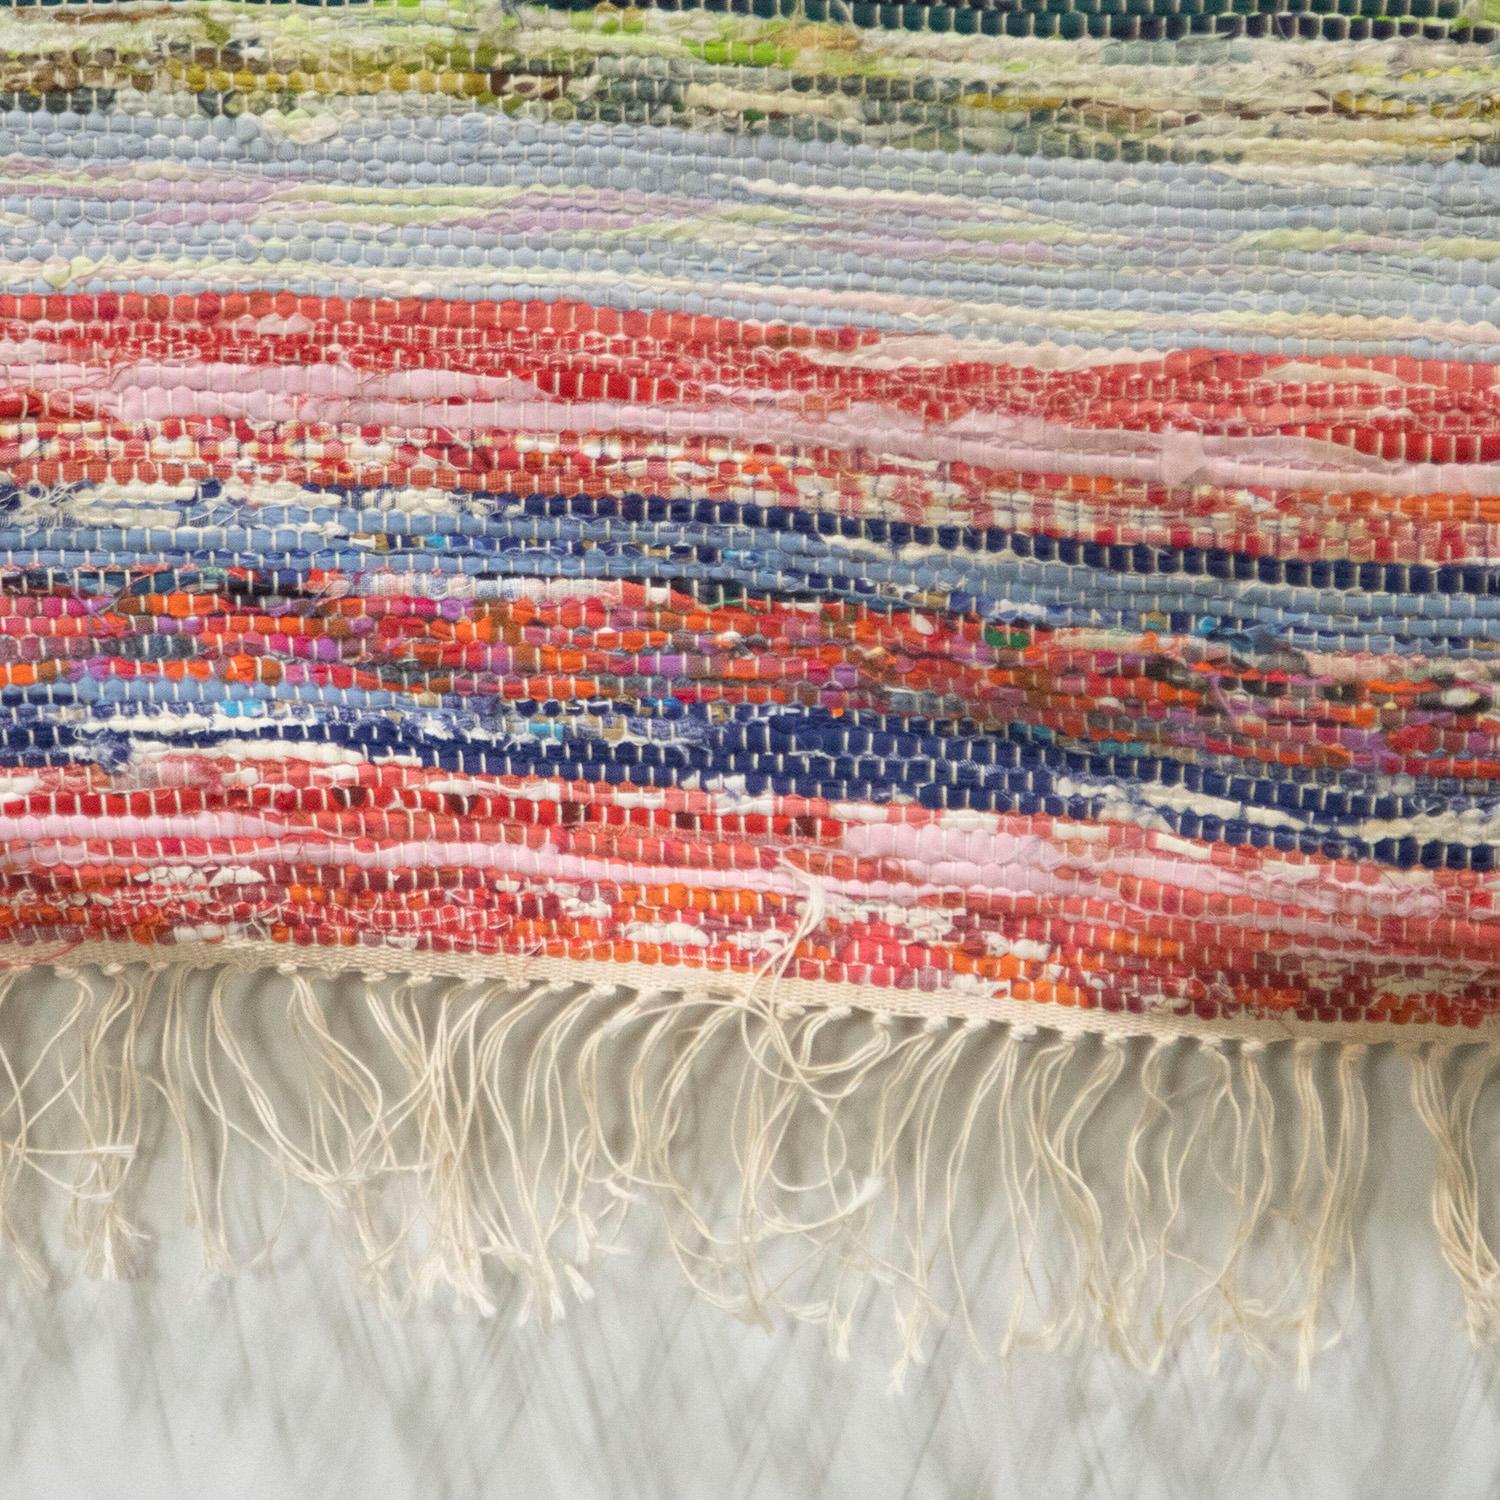 20th Century Swedish Rag Rug In Good Condition For Sale In Tetbury, Gloucestershire